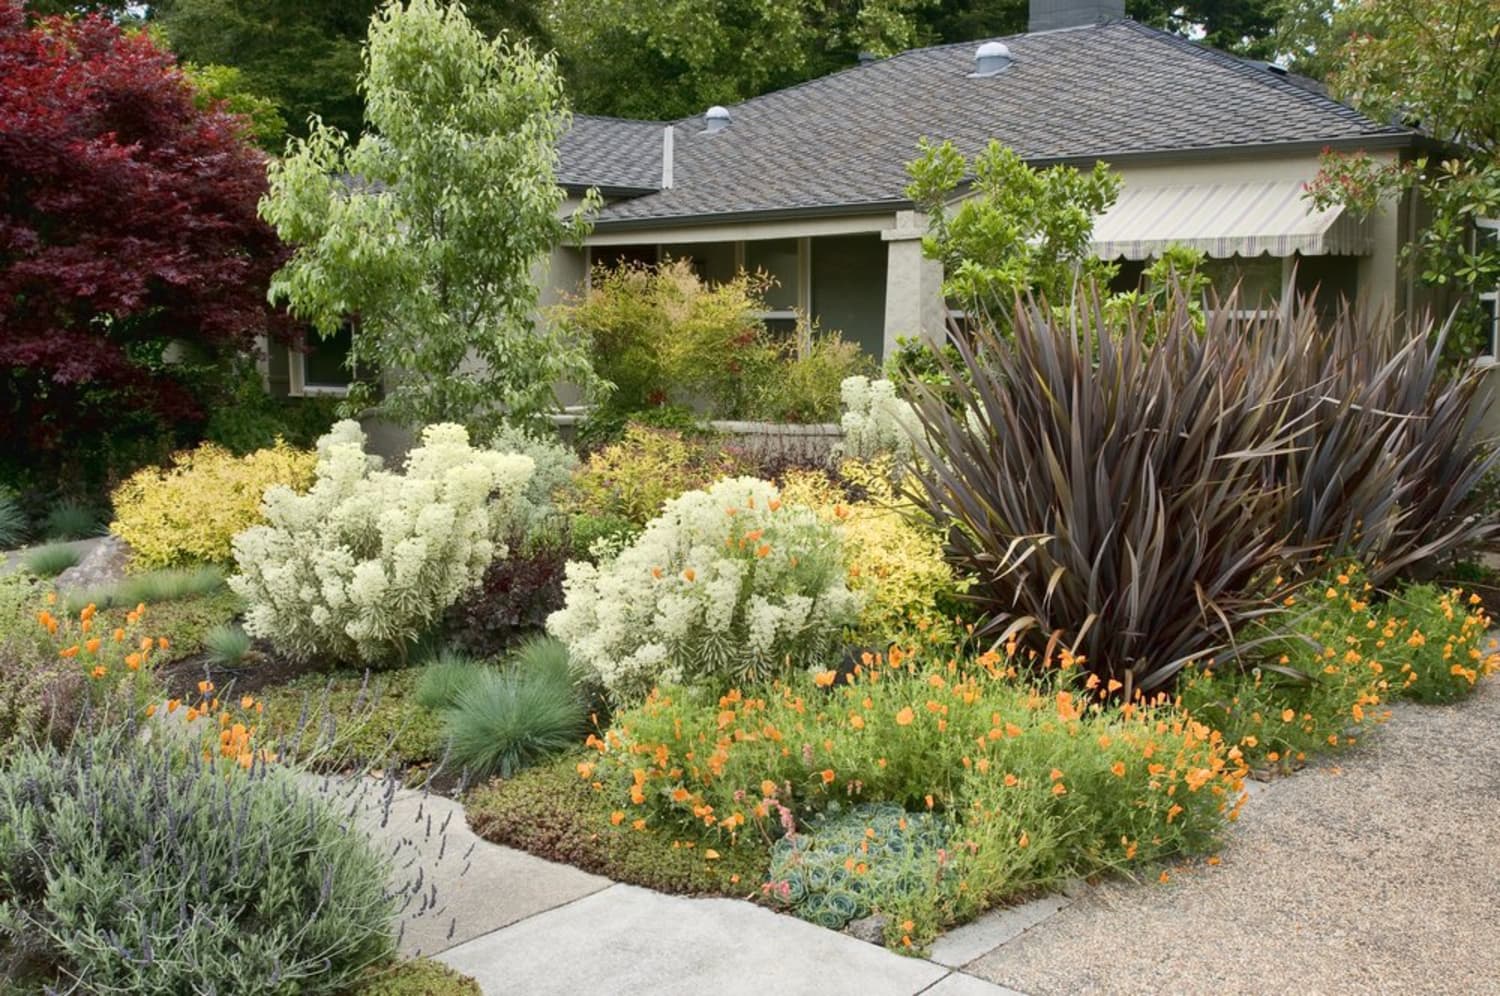 How Much Did It Cost to Landscape Your Yard? | Apartment ...